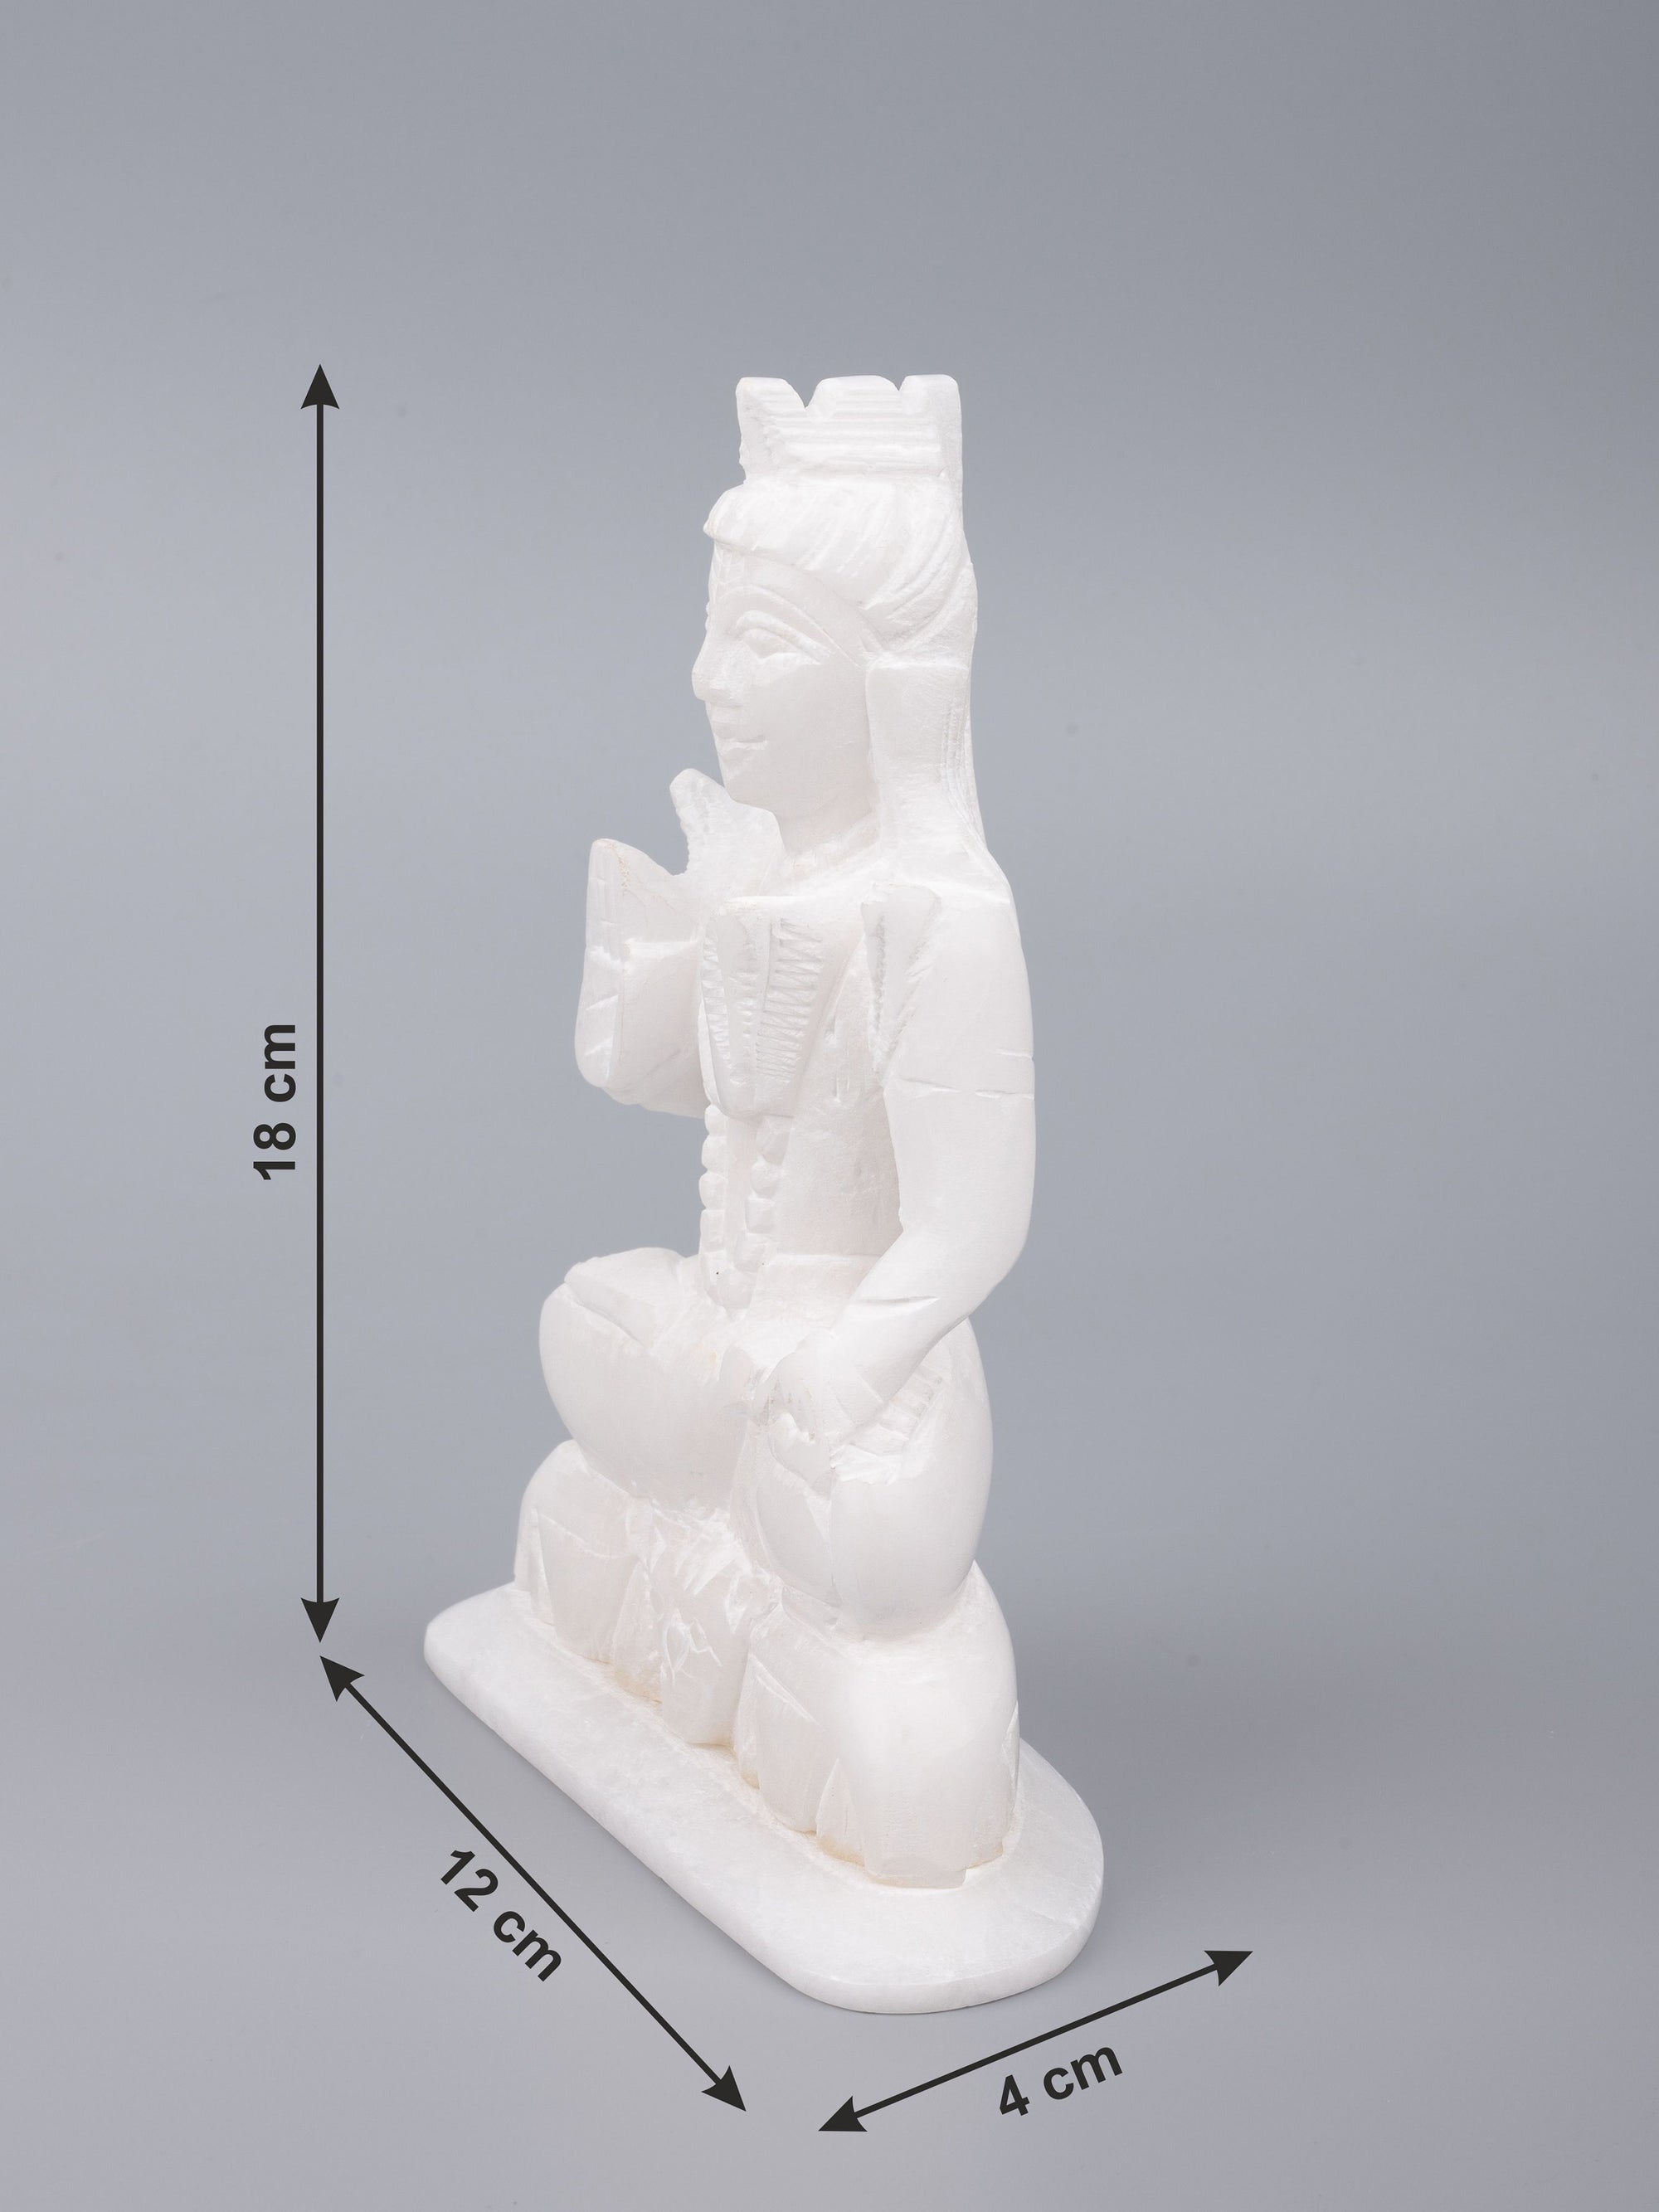 White marble Lord Shiva statue - 6 inches height - The Heritage Artifacts